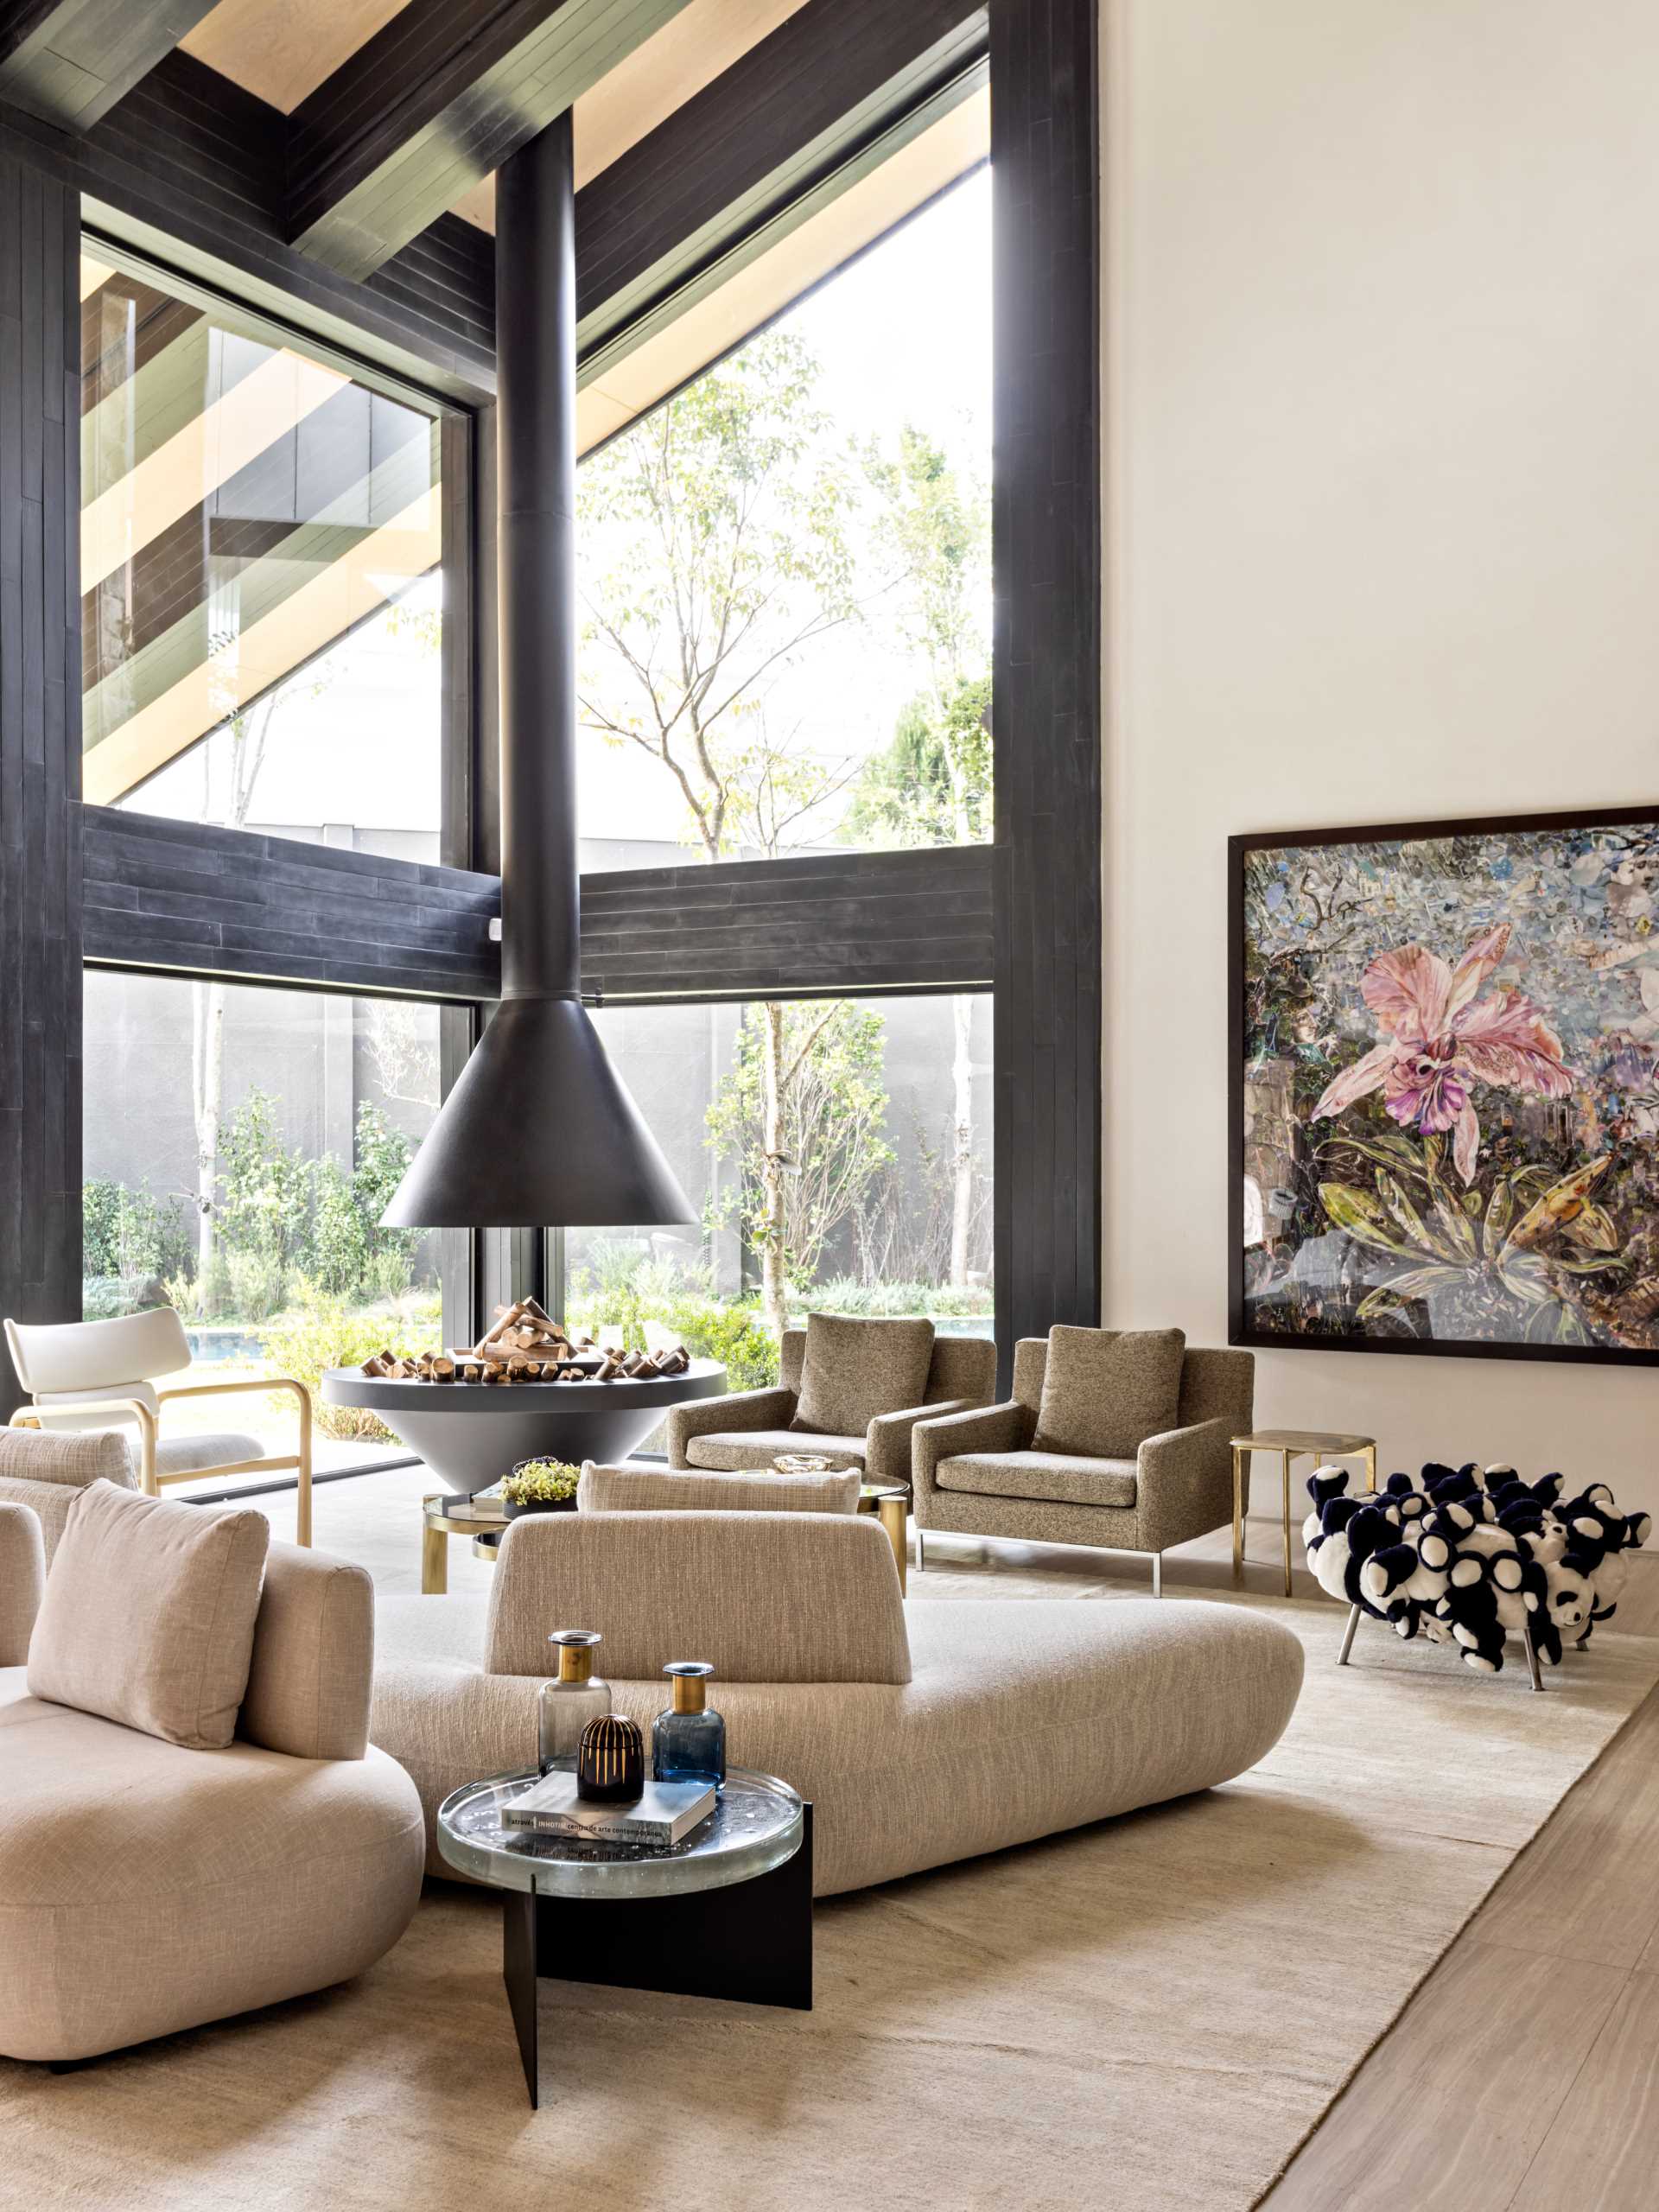 A modern black fireplace matched the stained wood structural details of this modern home.